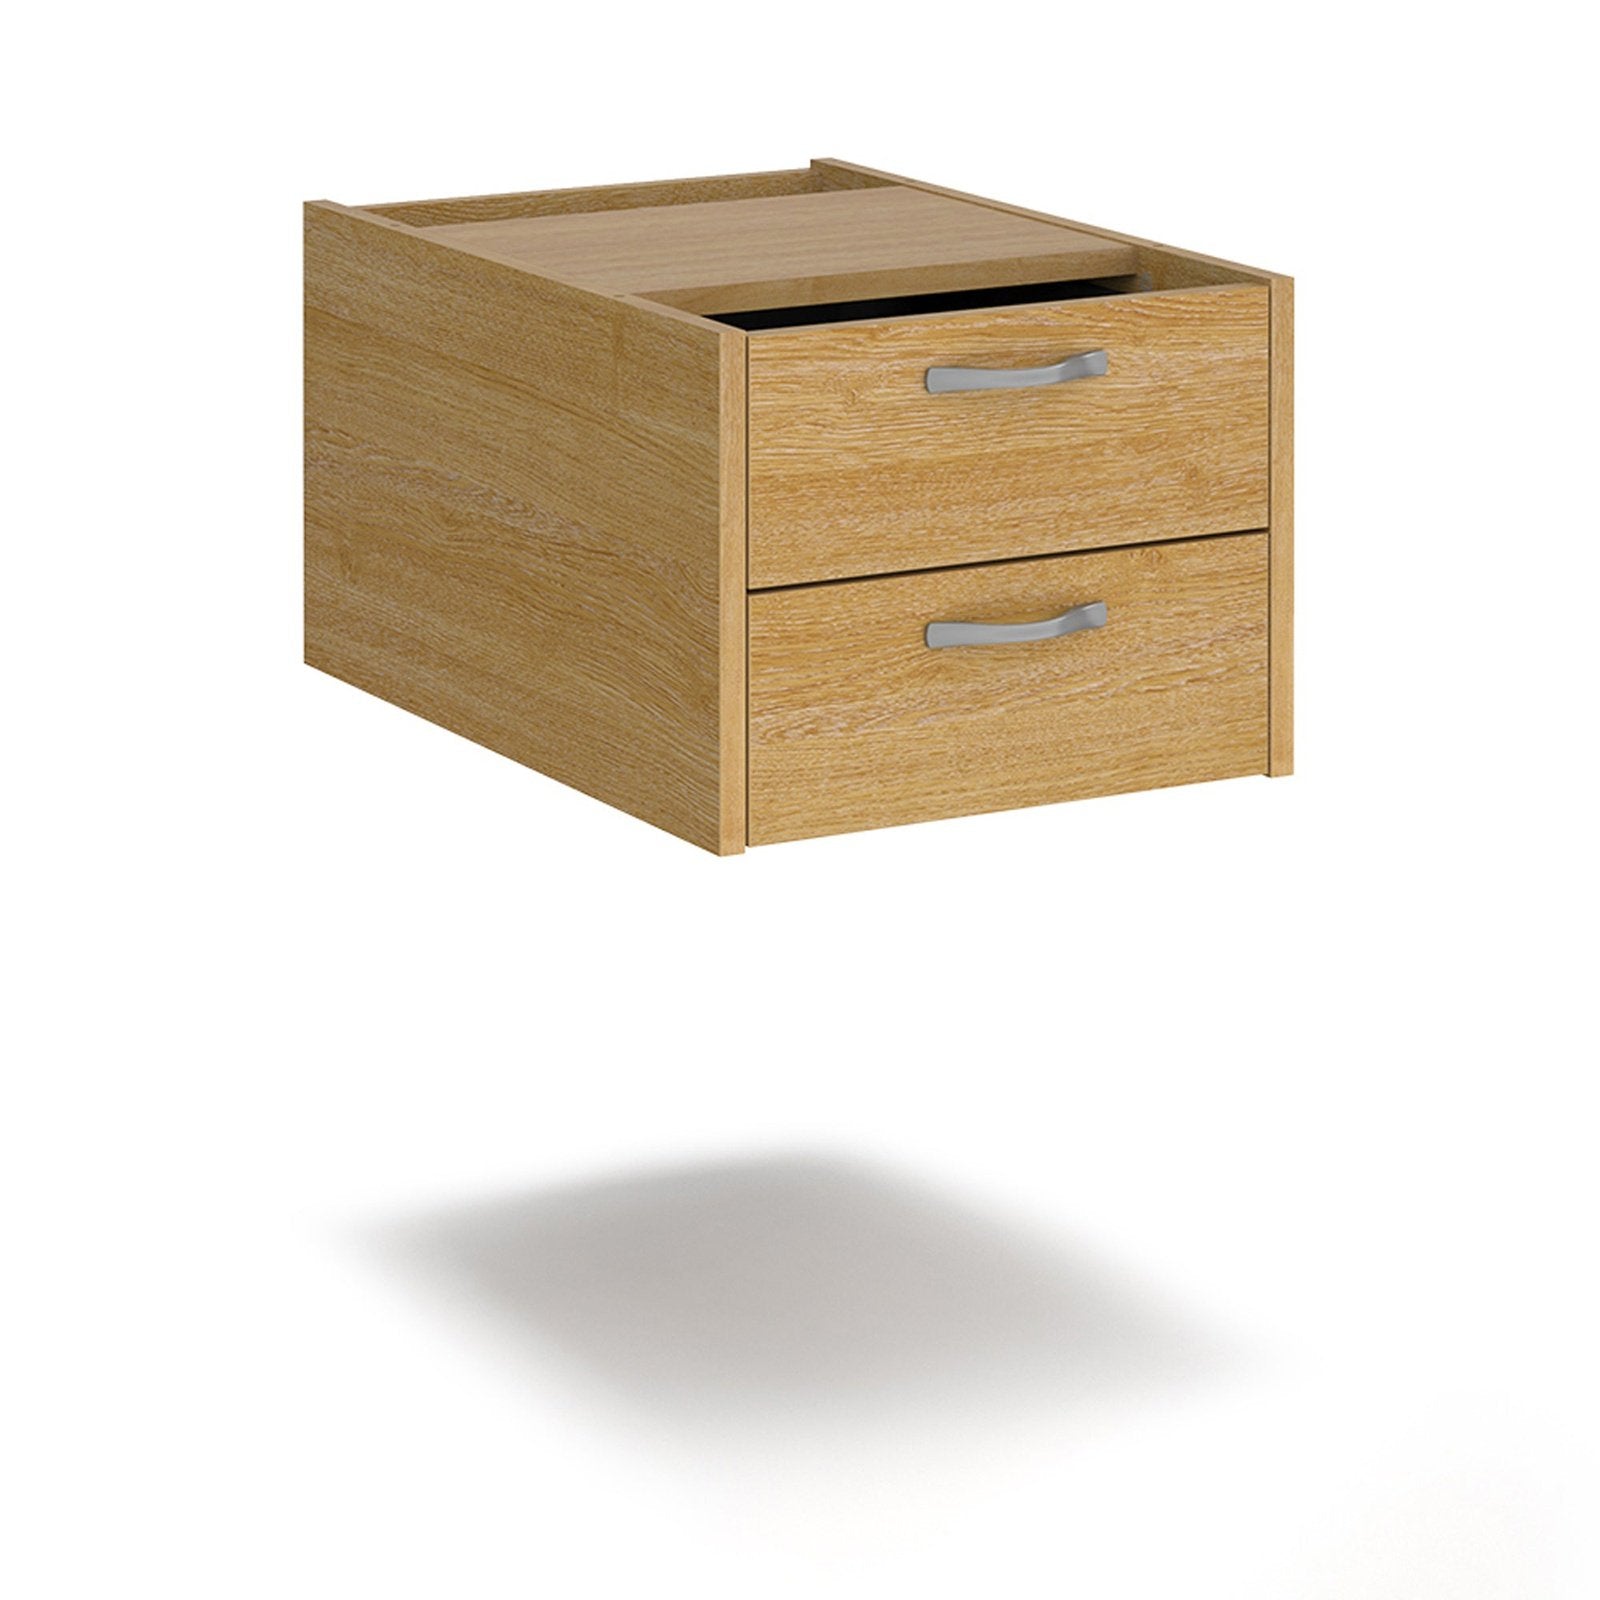 Maestro 25 shallow 2 drawer fixed pedestal for 600mm deep desks - Office Products Online